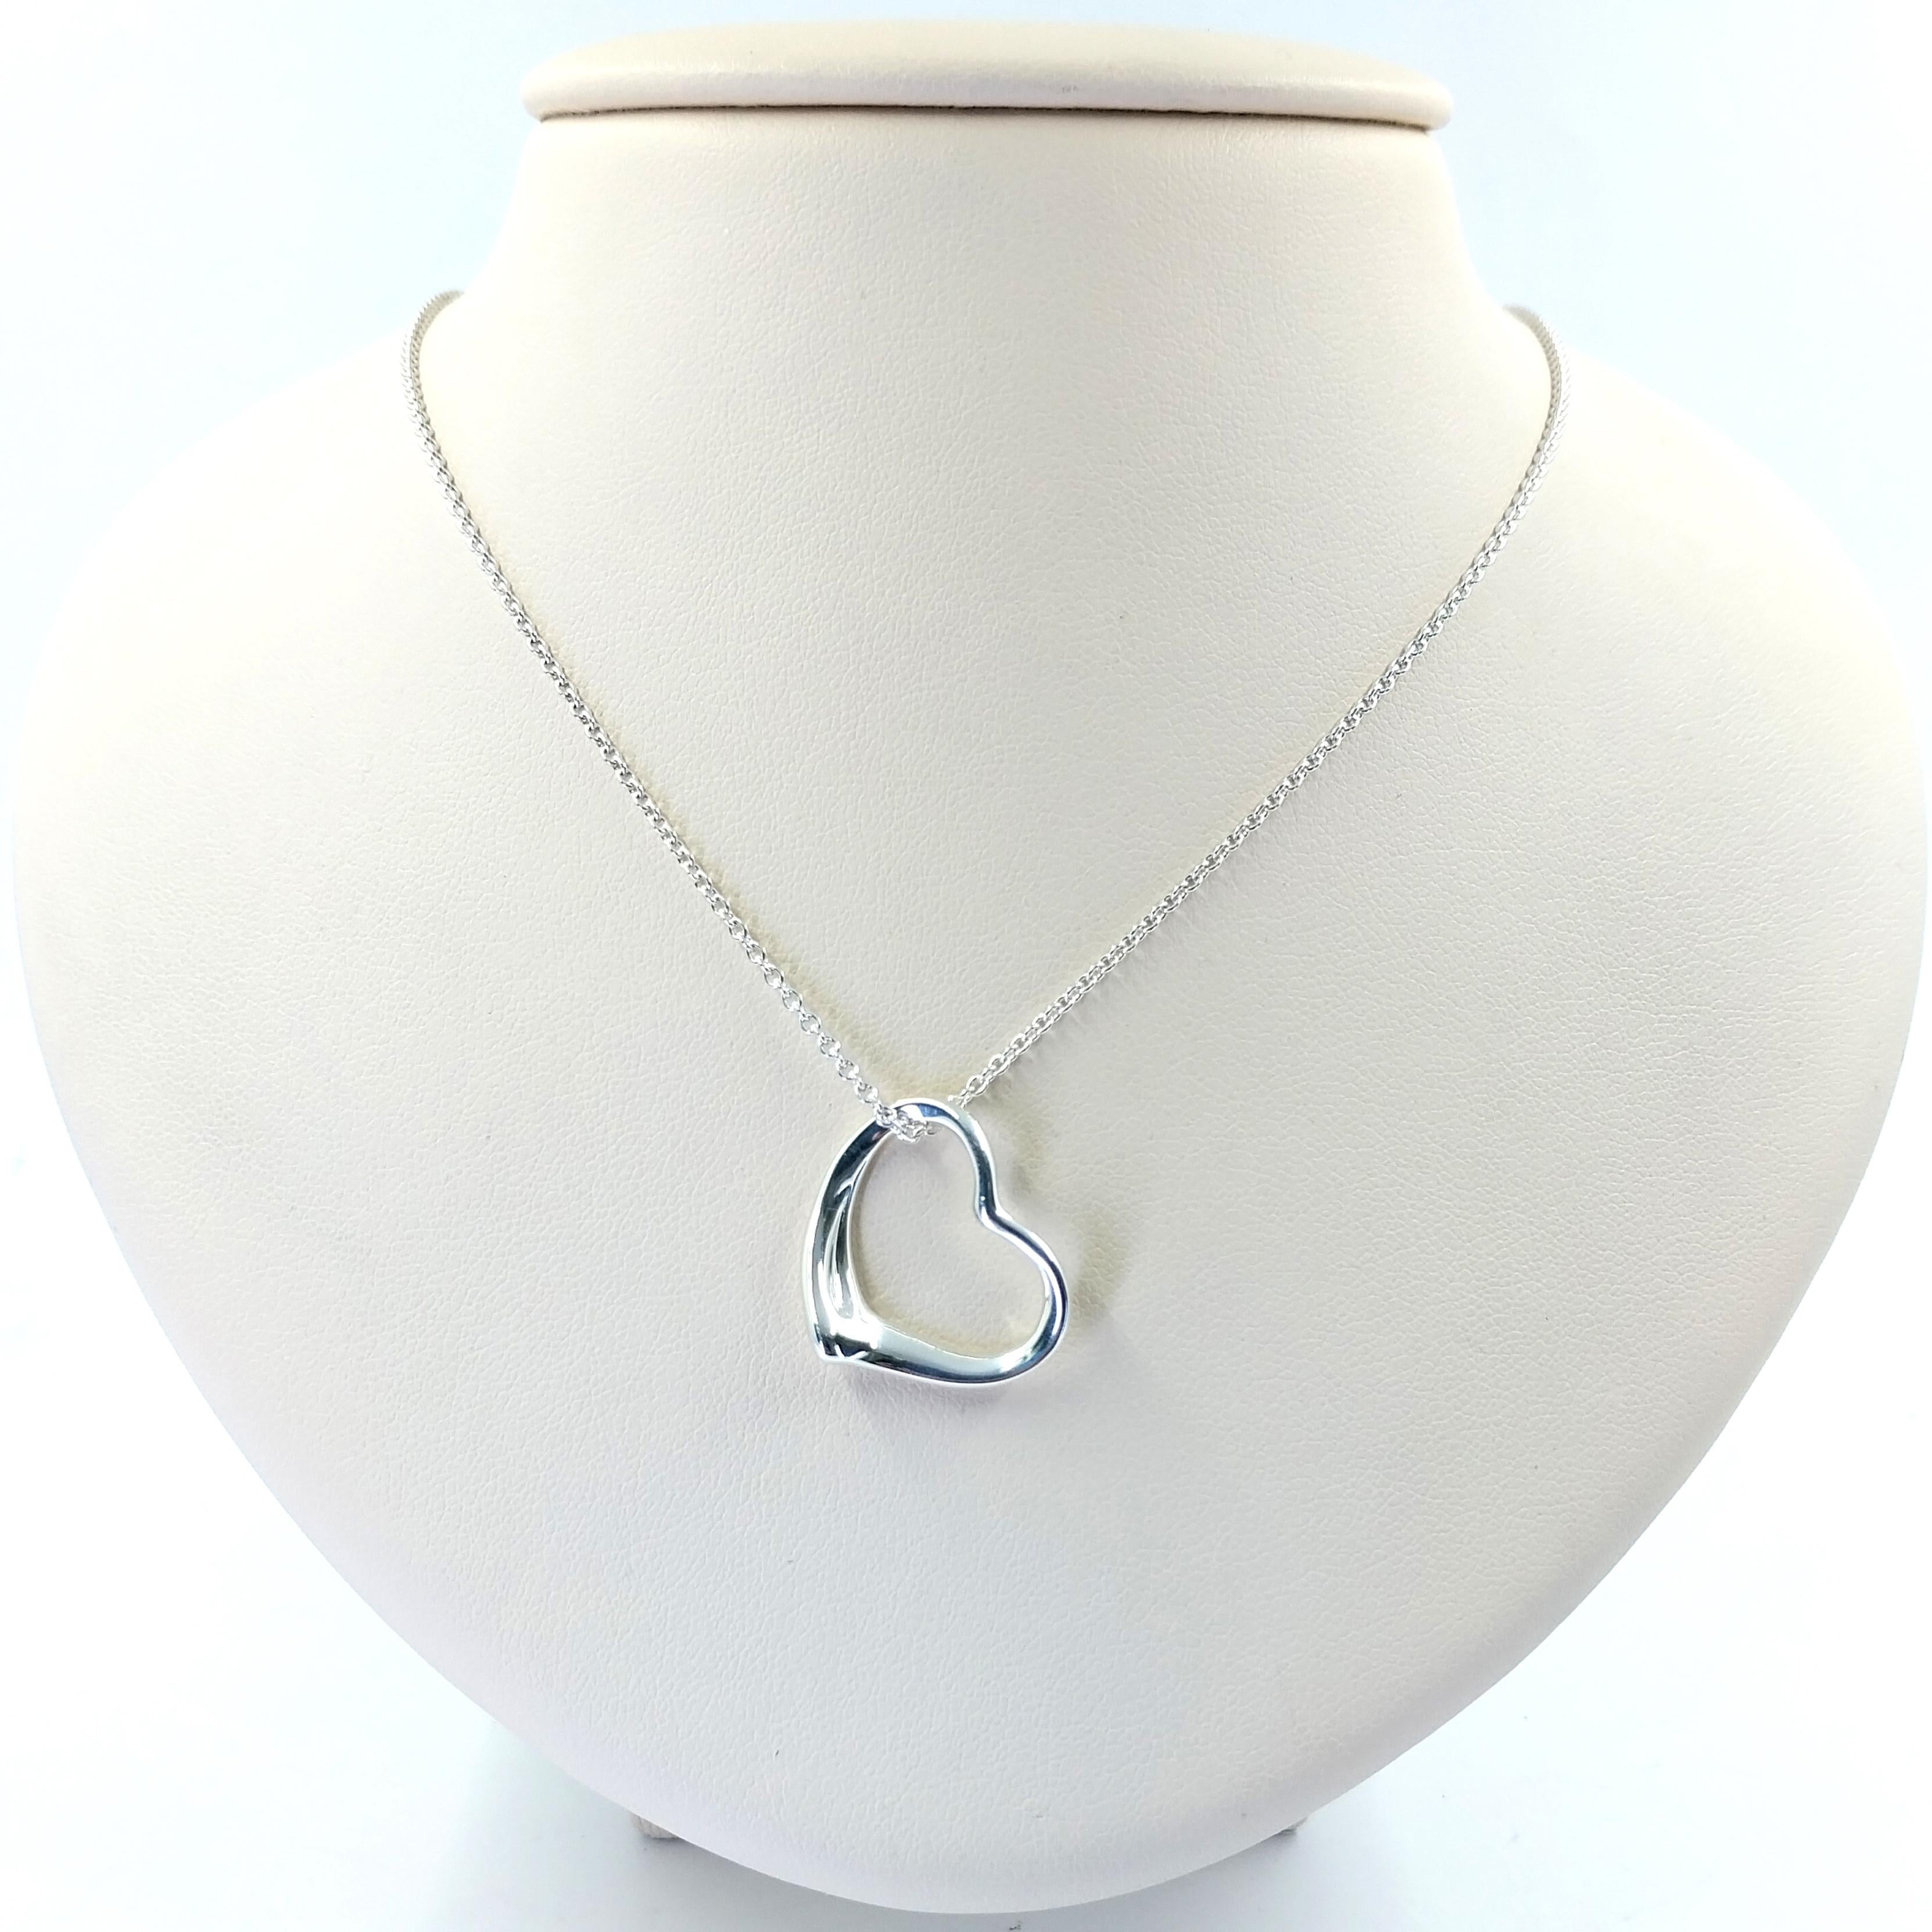 Pre-Owned Tiffany & Co Elsa Peretti Sterling Silver Open Heart Pendant Necklace. 18 Inch Length. $600 MSRP. Includes Tiffany pouch.